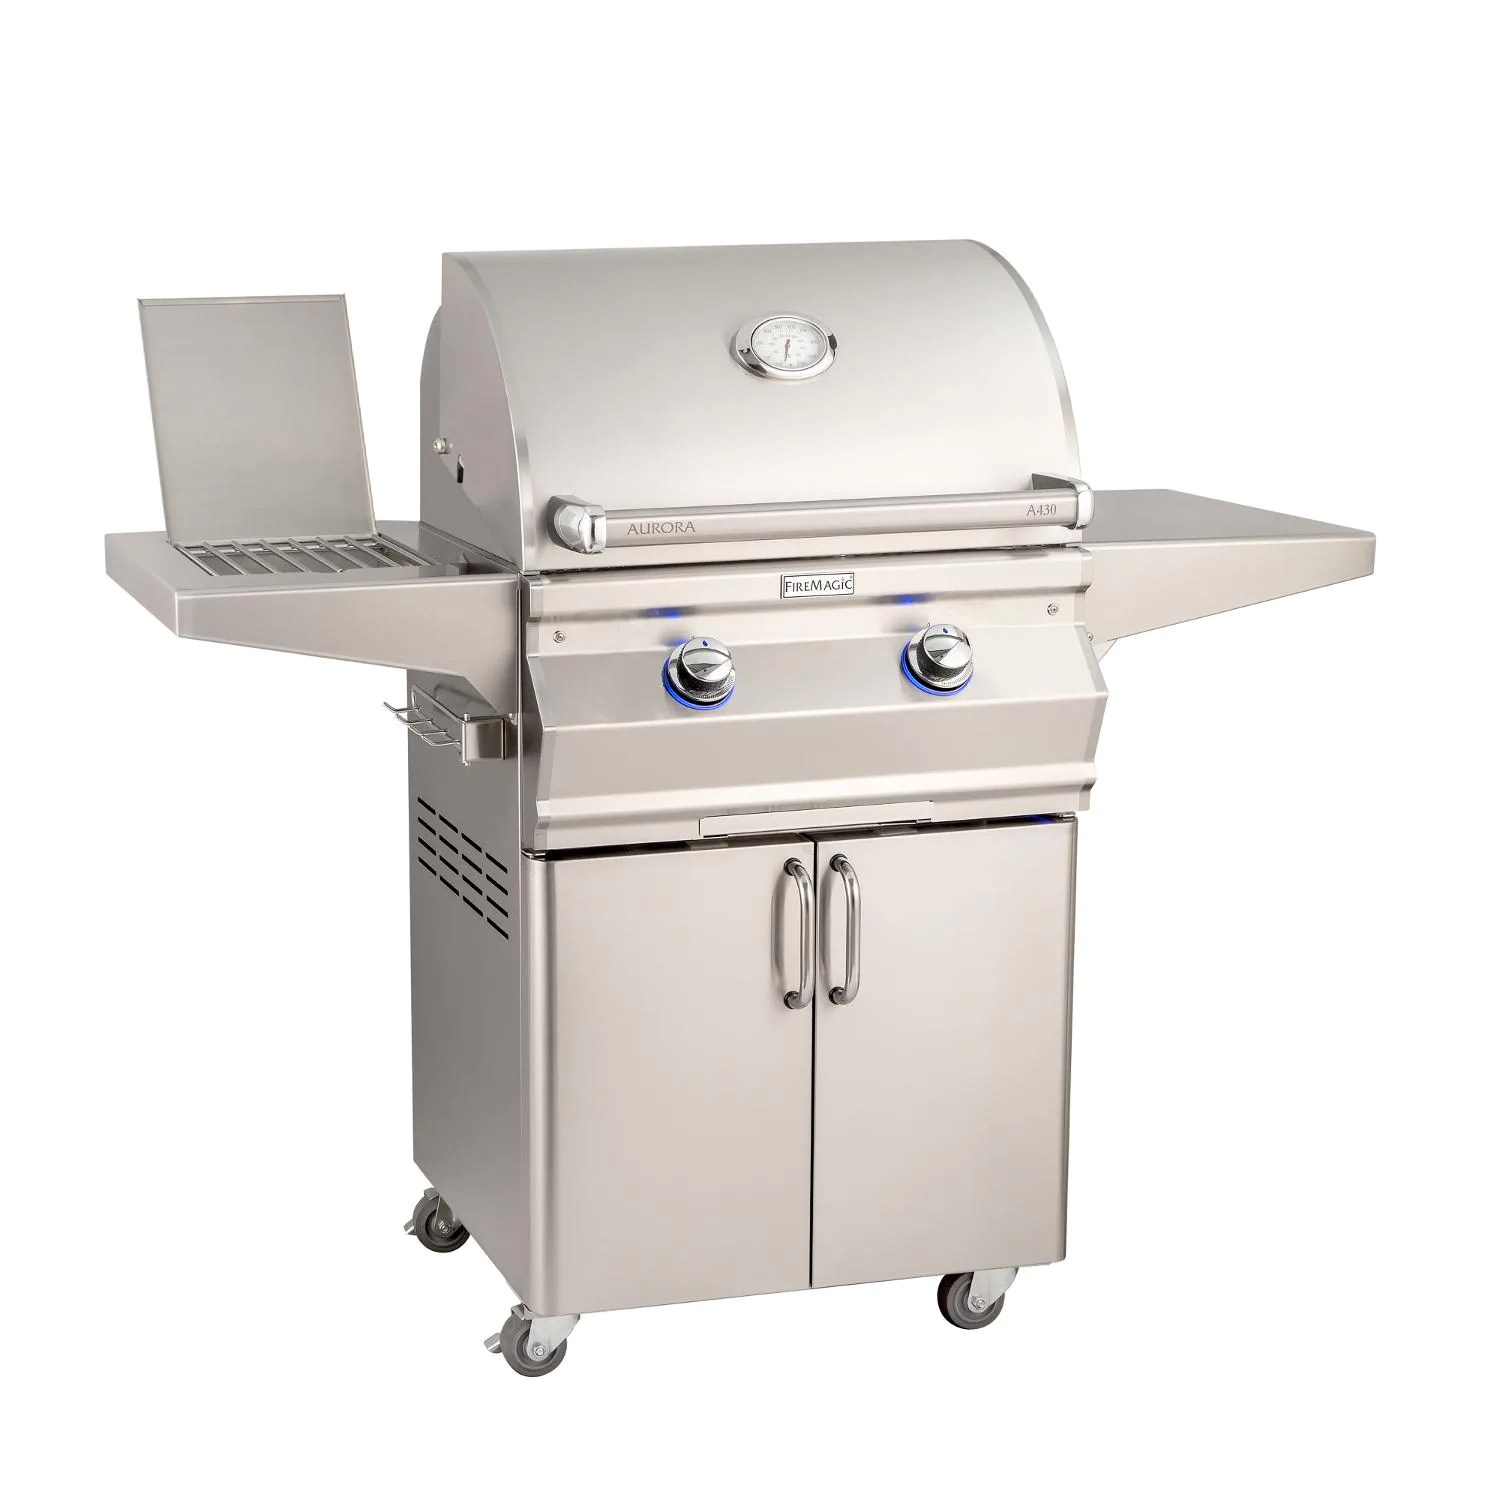 Fire Magic - Aurora A430S 24-Inch Propane Gas Grill With Side Burner And Analog Thermometer - A430S-7EAP-62